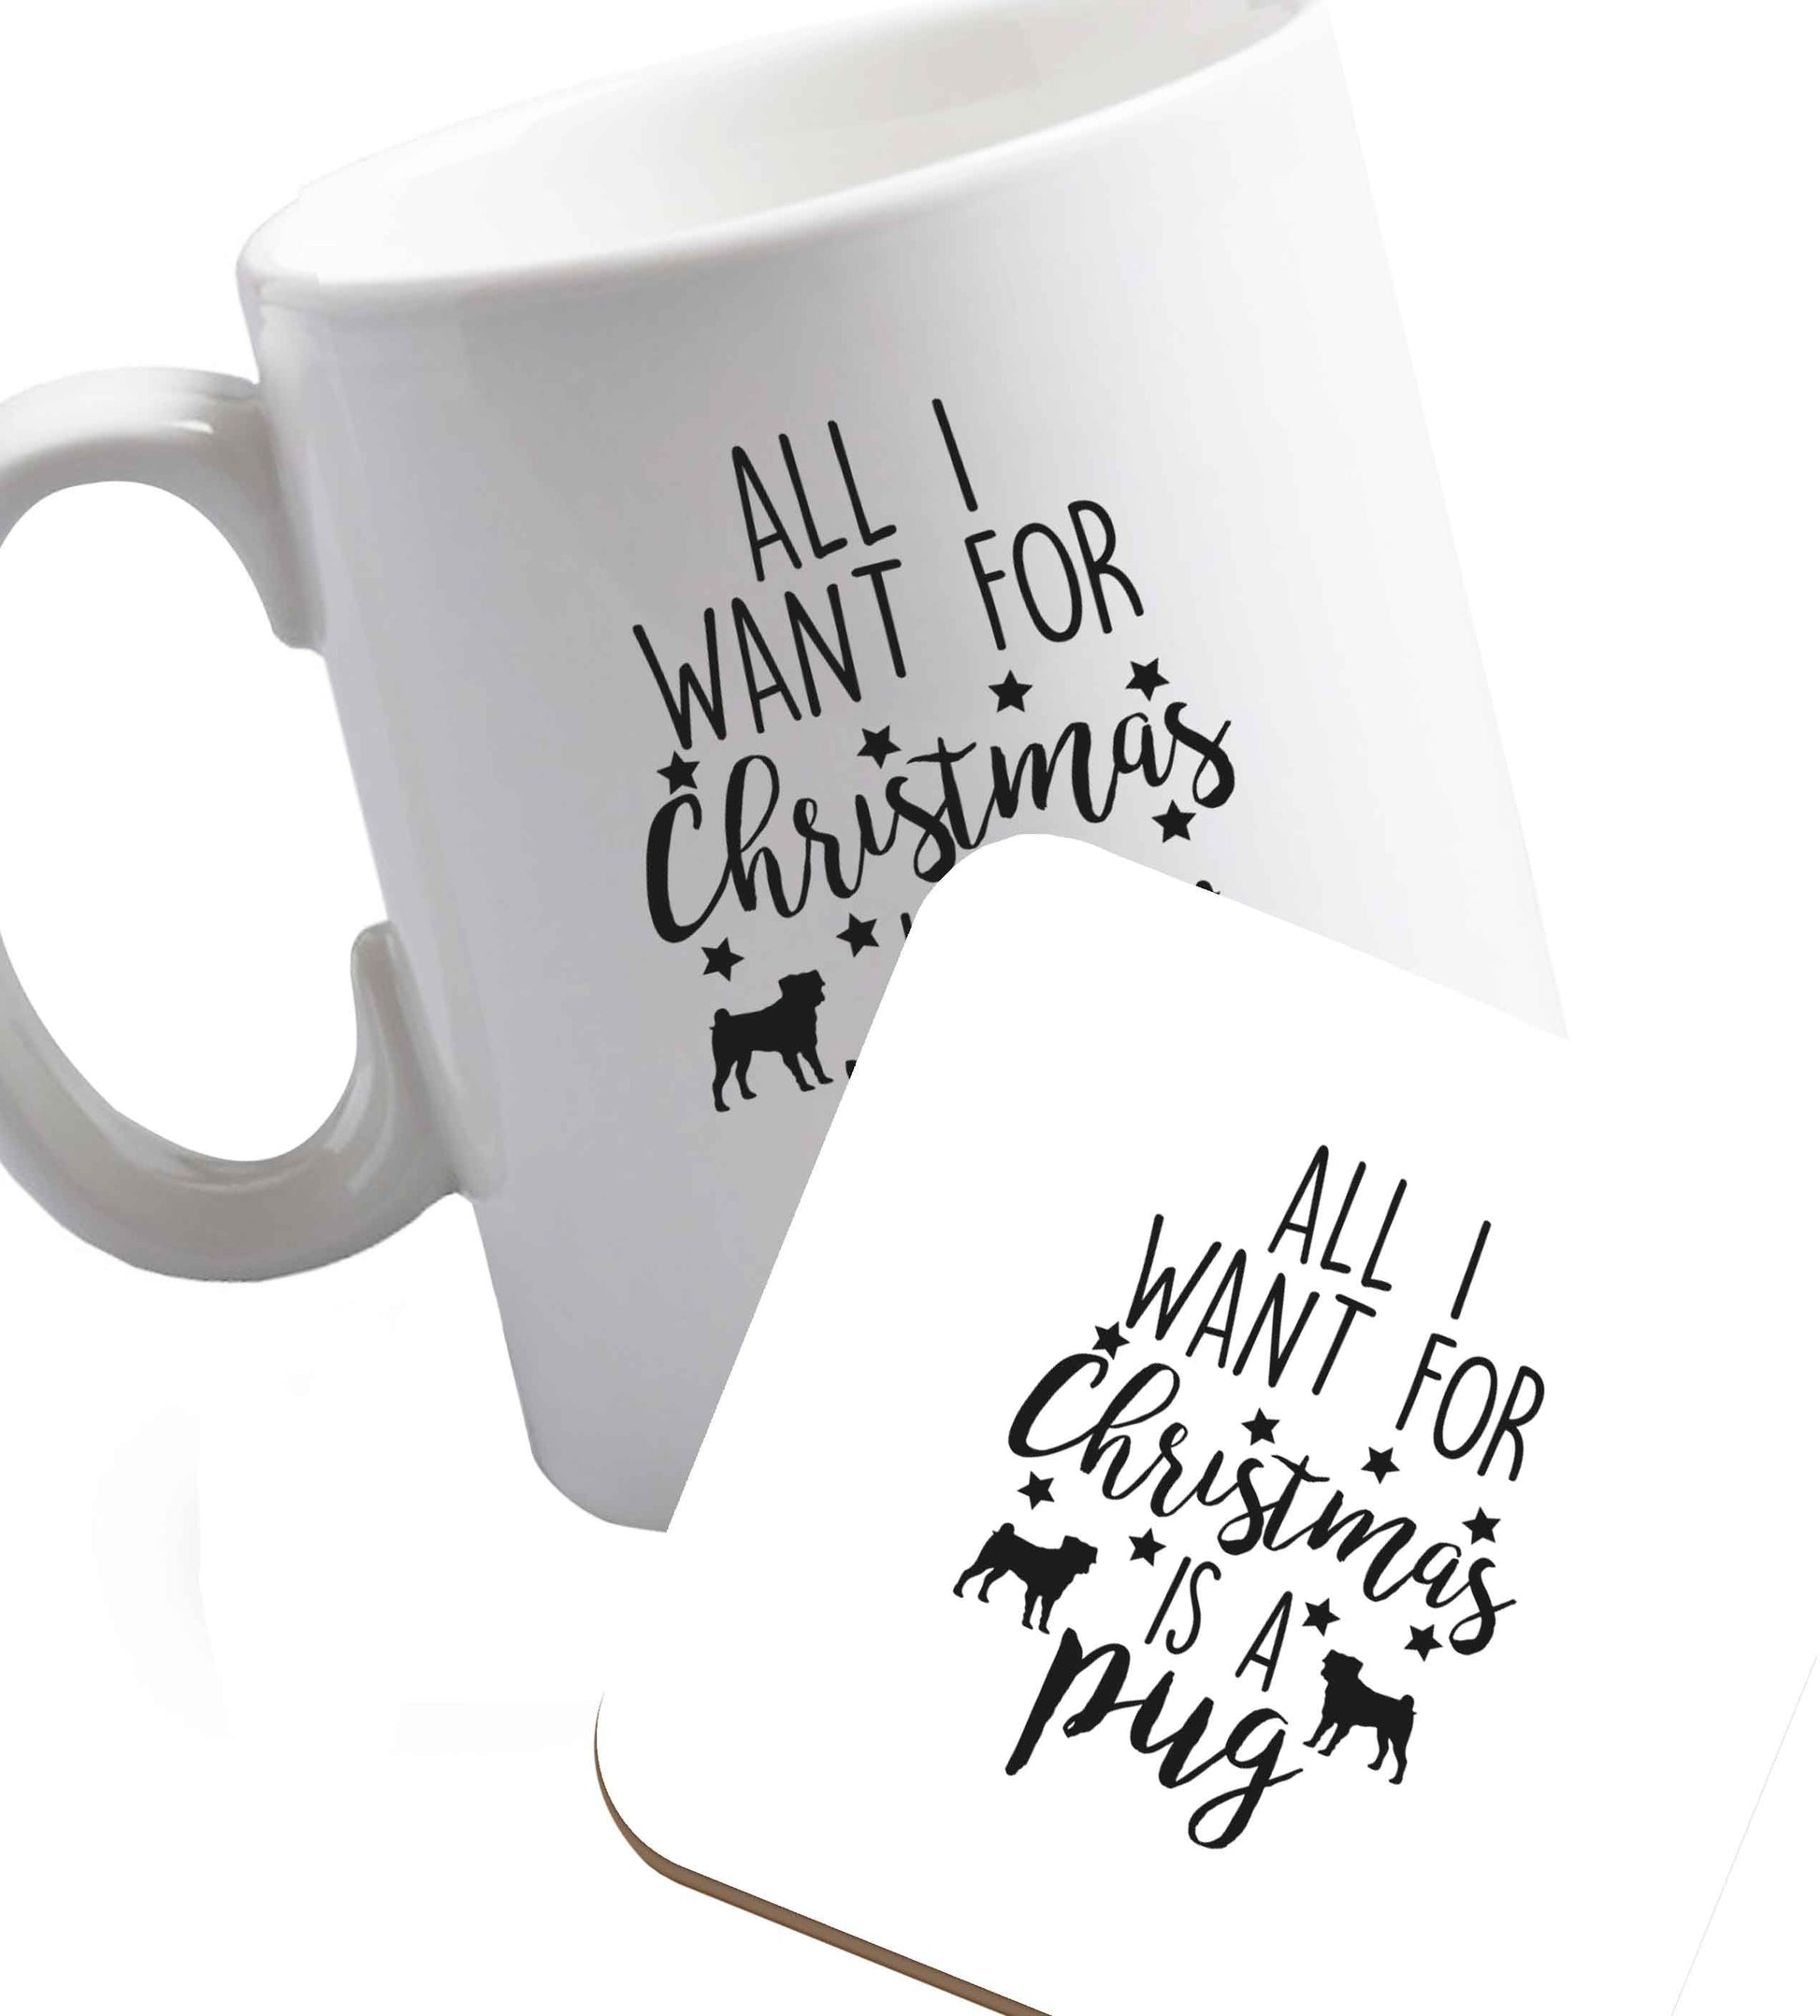 10 oz All I want for Christmas is a pug ceramic mug and coaster set right handed